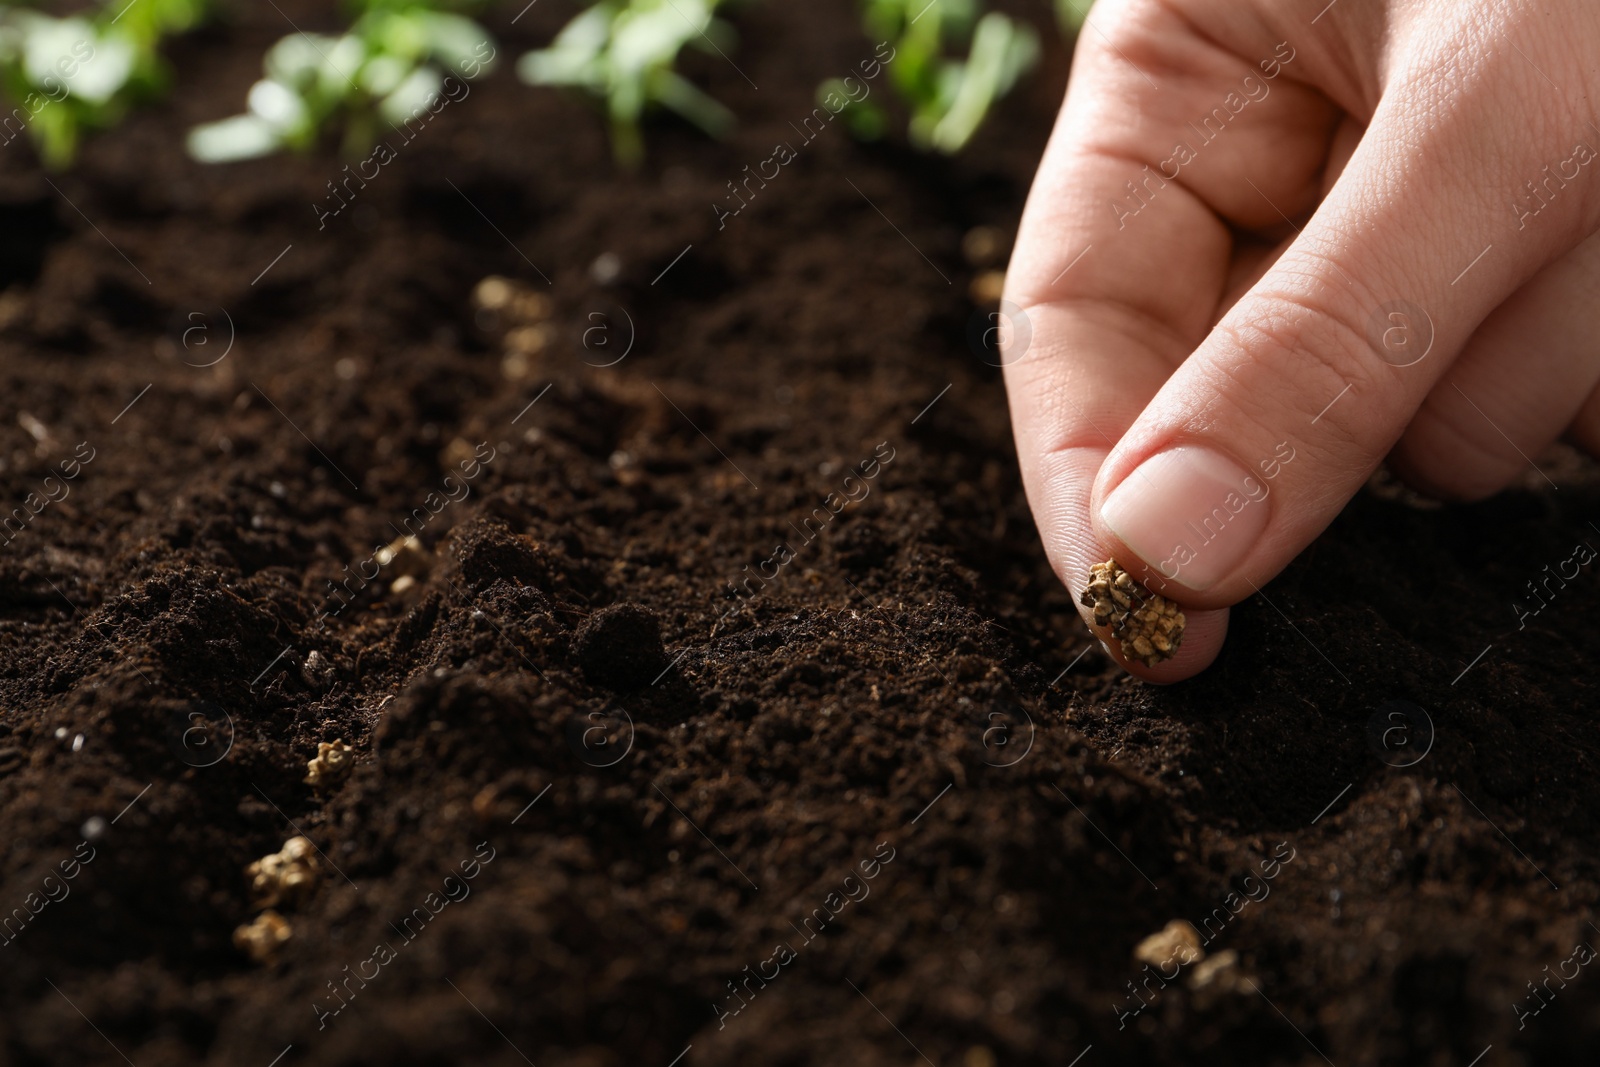 Photo of Woman planting beet seeds into fertile soil, space for text. Vegetables growing